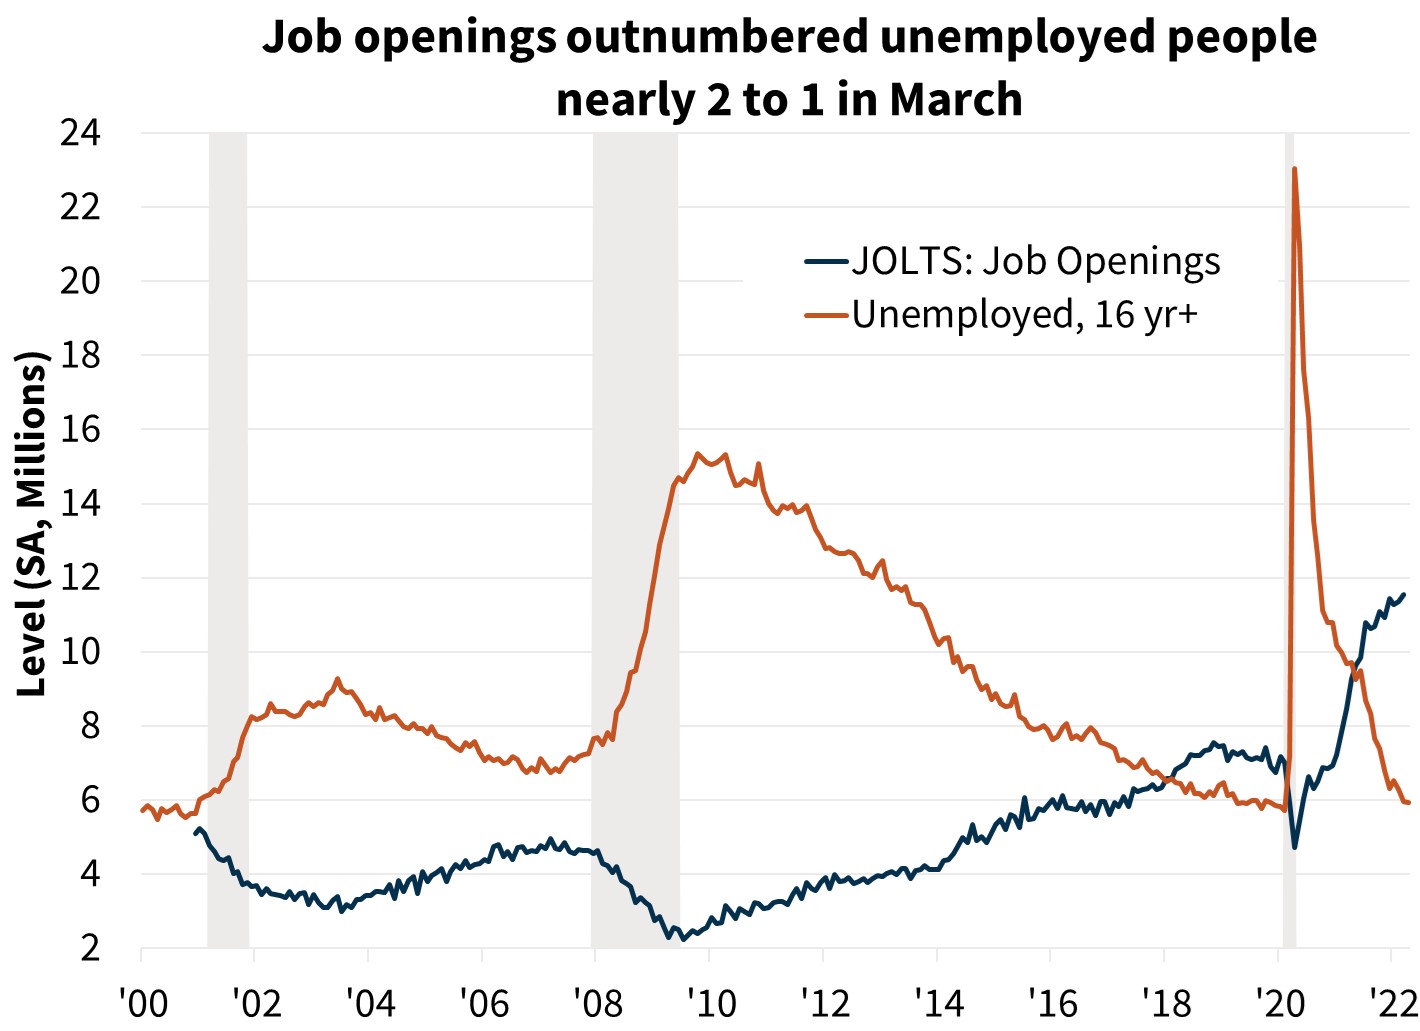  Job openings outnumbered unemployed people nearly 2 to 1 in March 